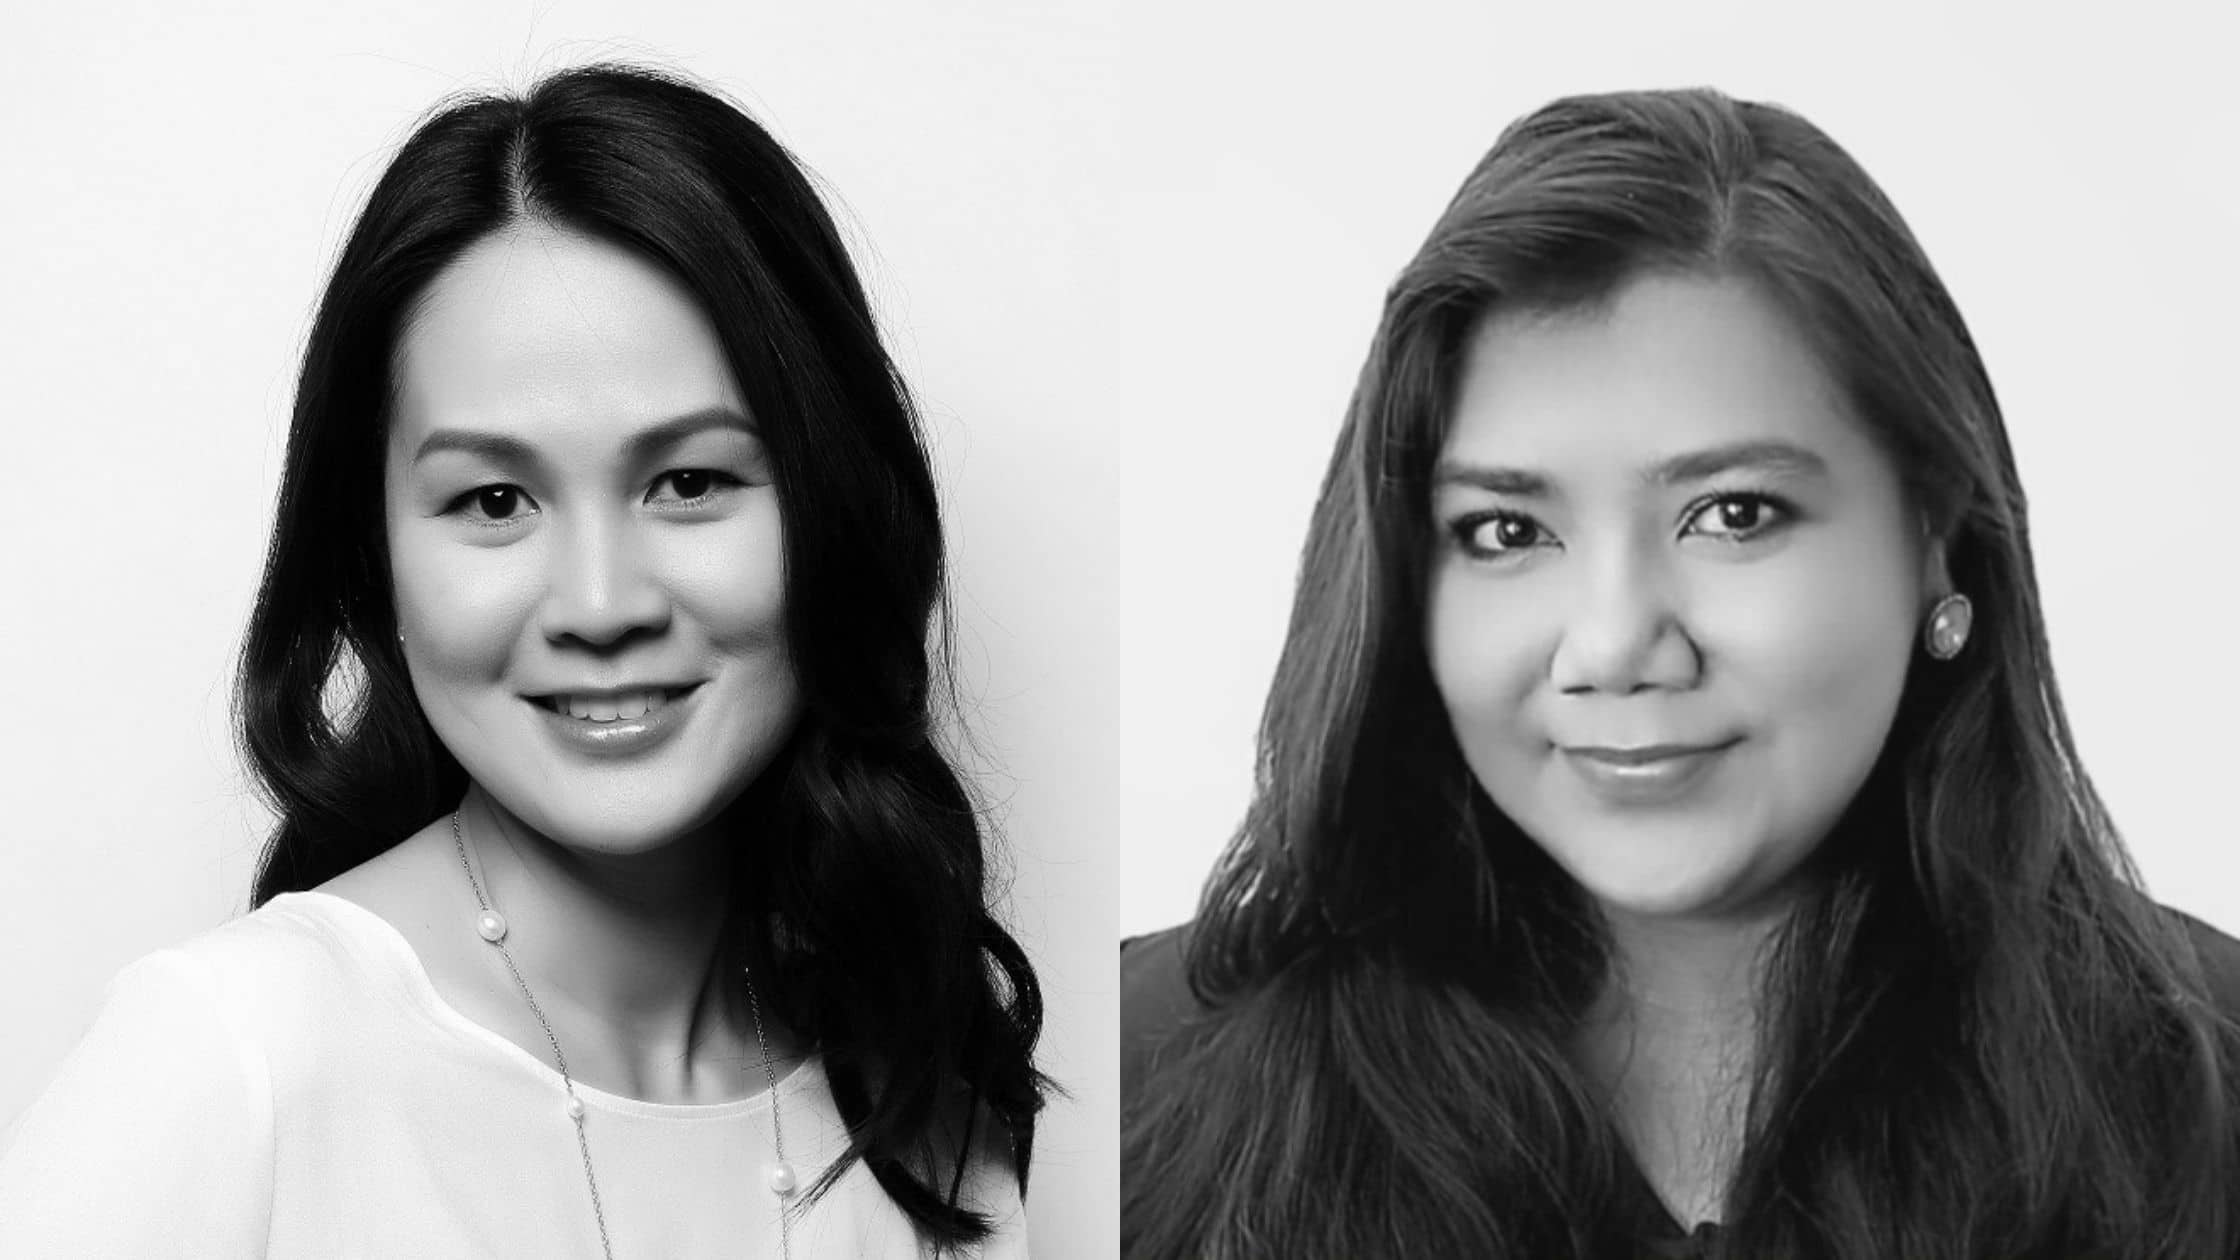 Genevieve Chow and Hetty Musfirah Join Sandpiper Communications’ Growing Technology Team in Asia Pacific